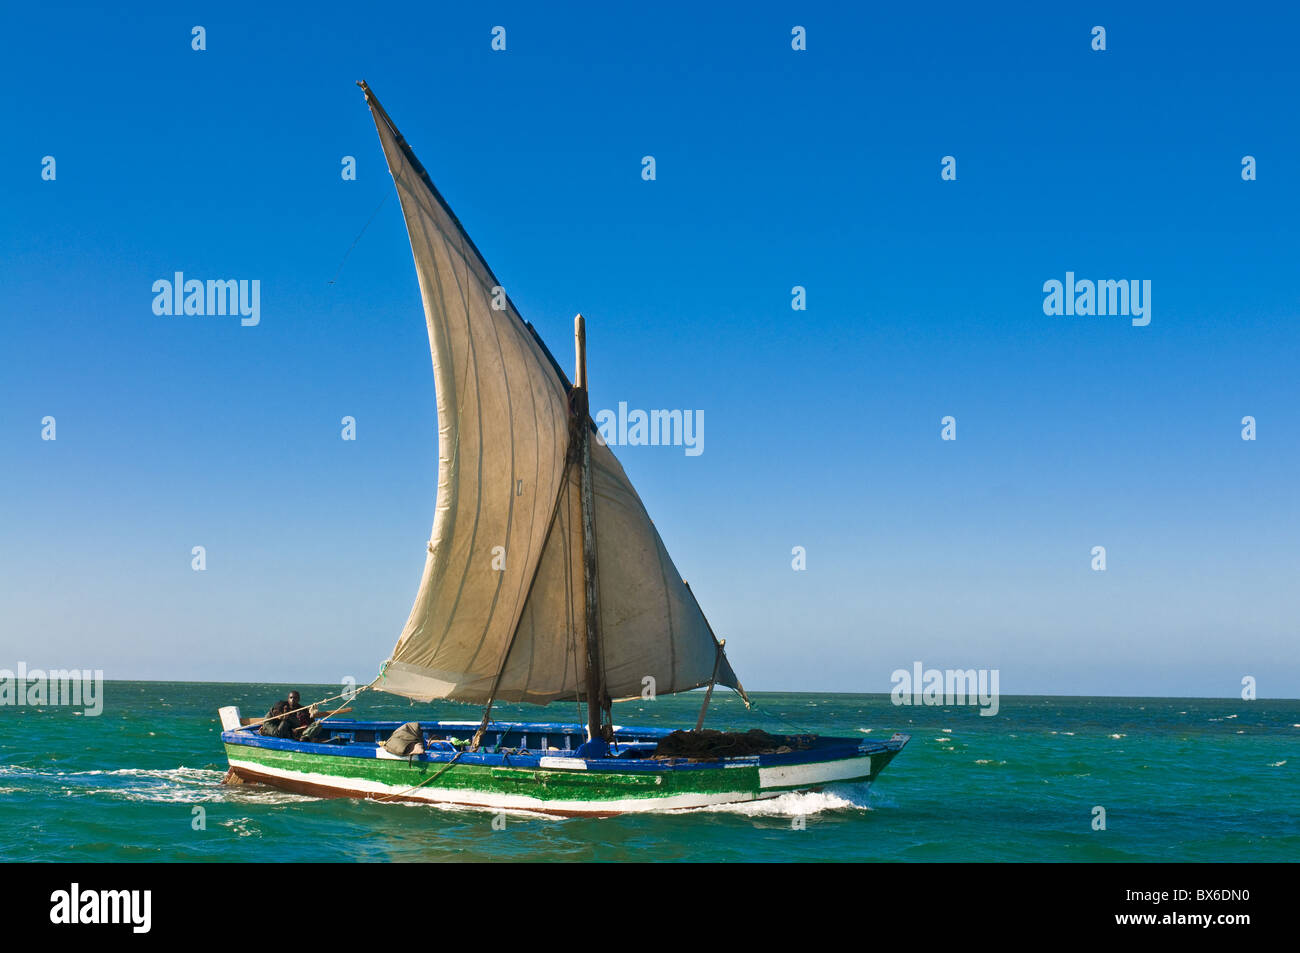 Traditional sailing boat in waters of the Banc d'Arguin, Mauritania, Africa Stock Photo